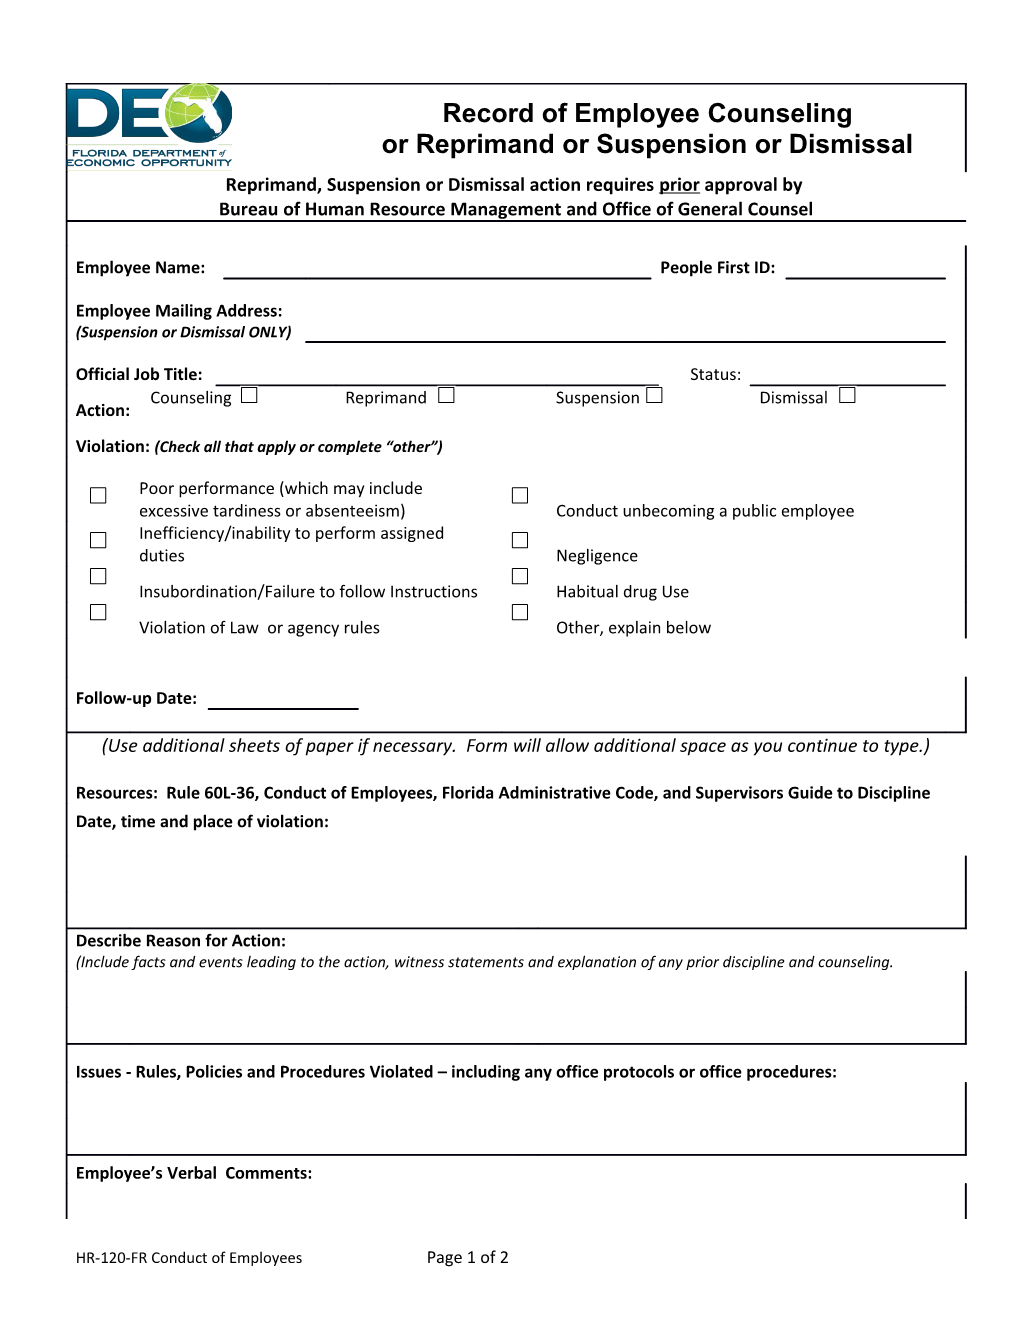 HR-120-FR Conduct of Employees Page 1 of 2